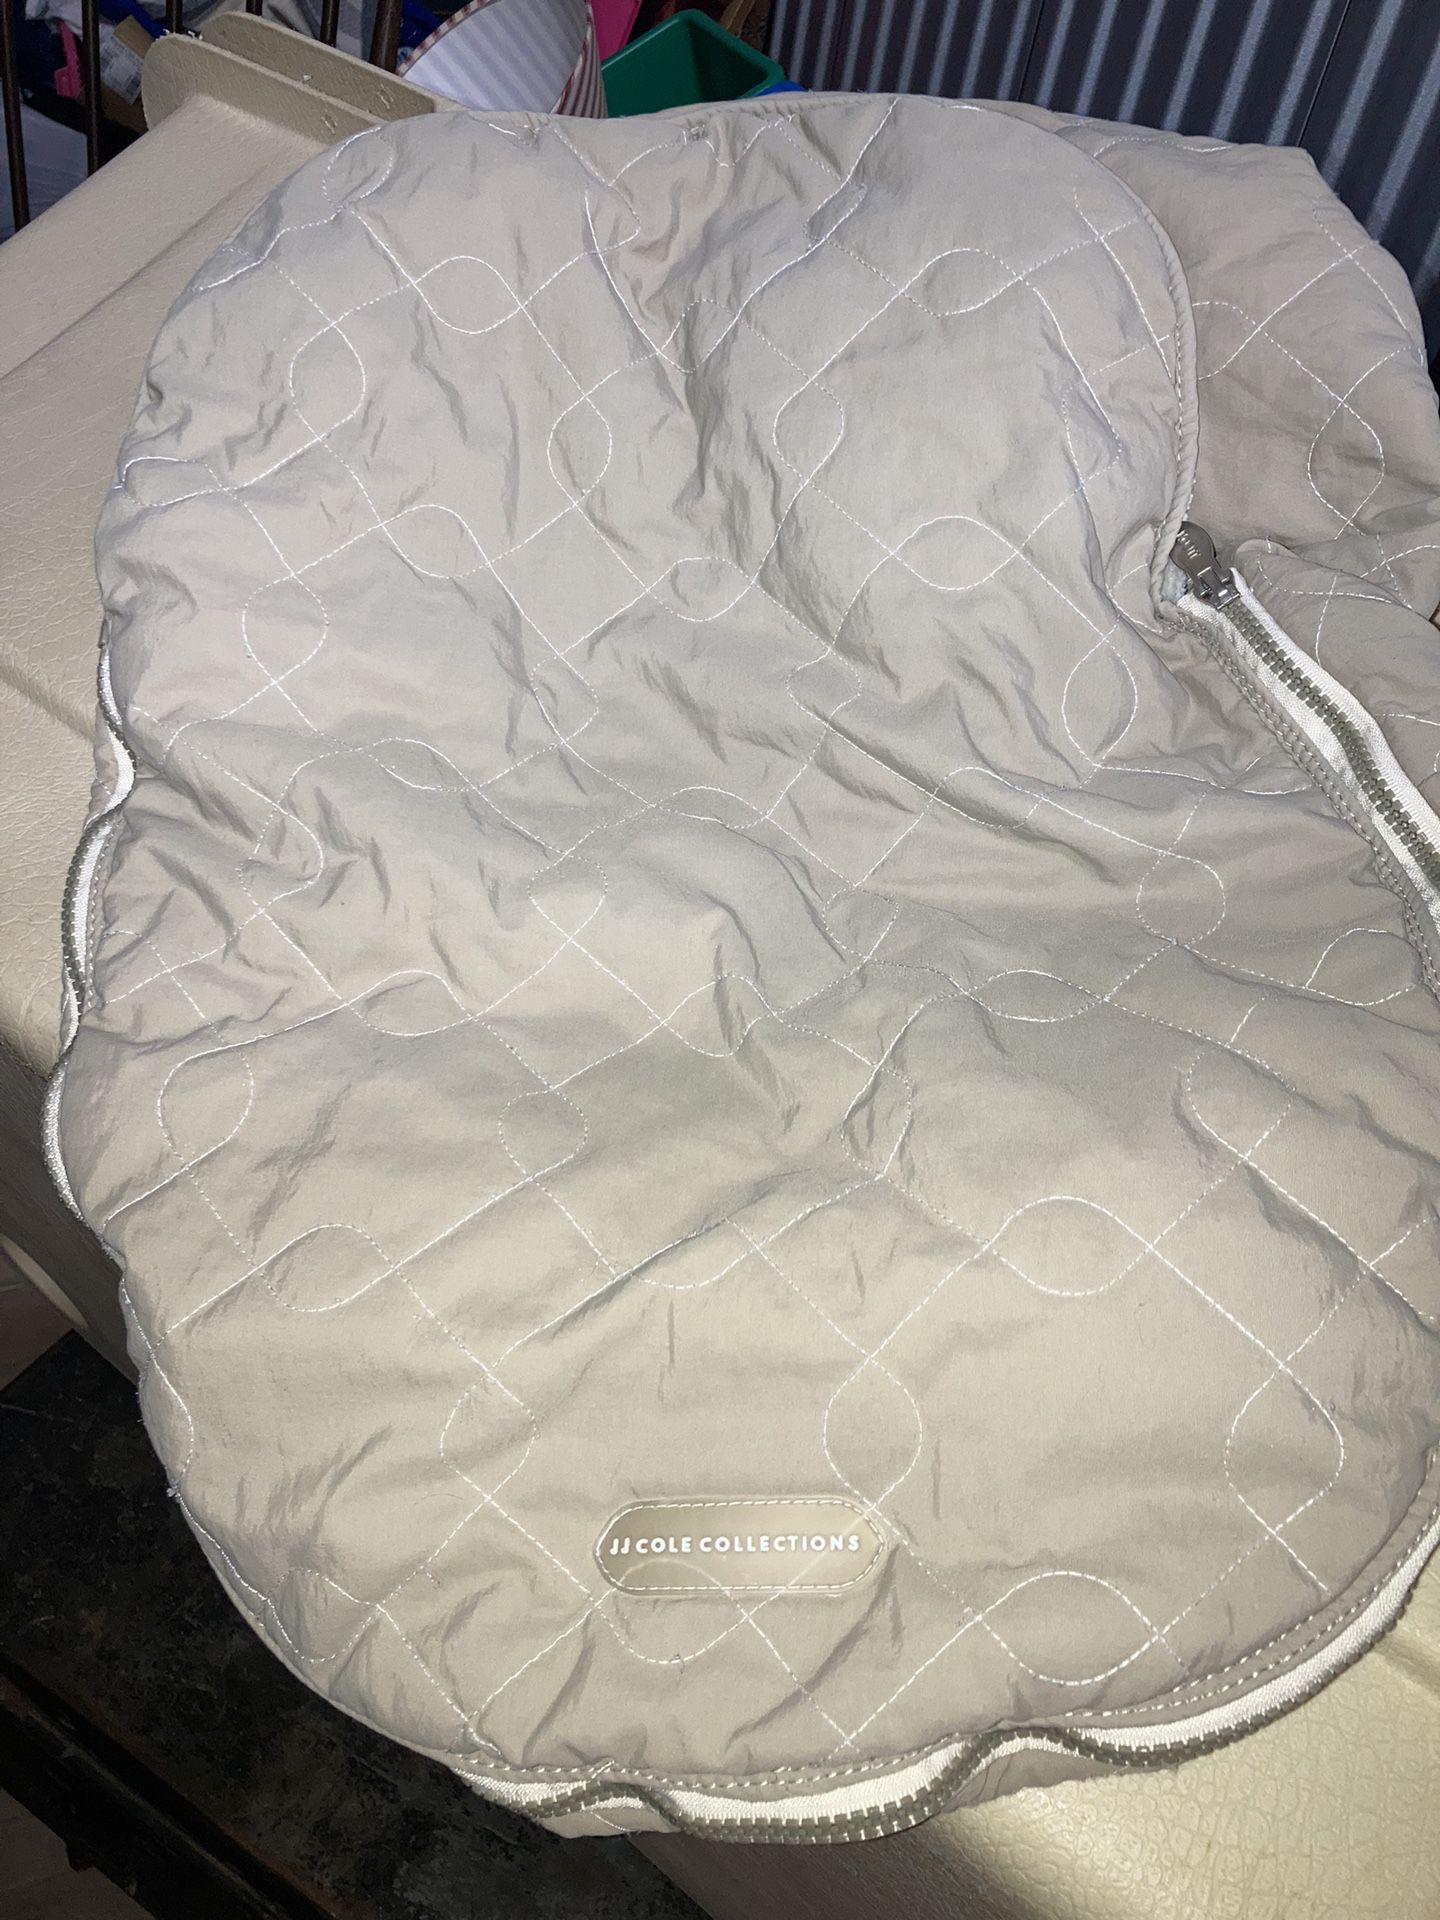 Infant Car Seat Cover 